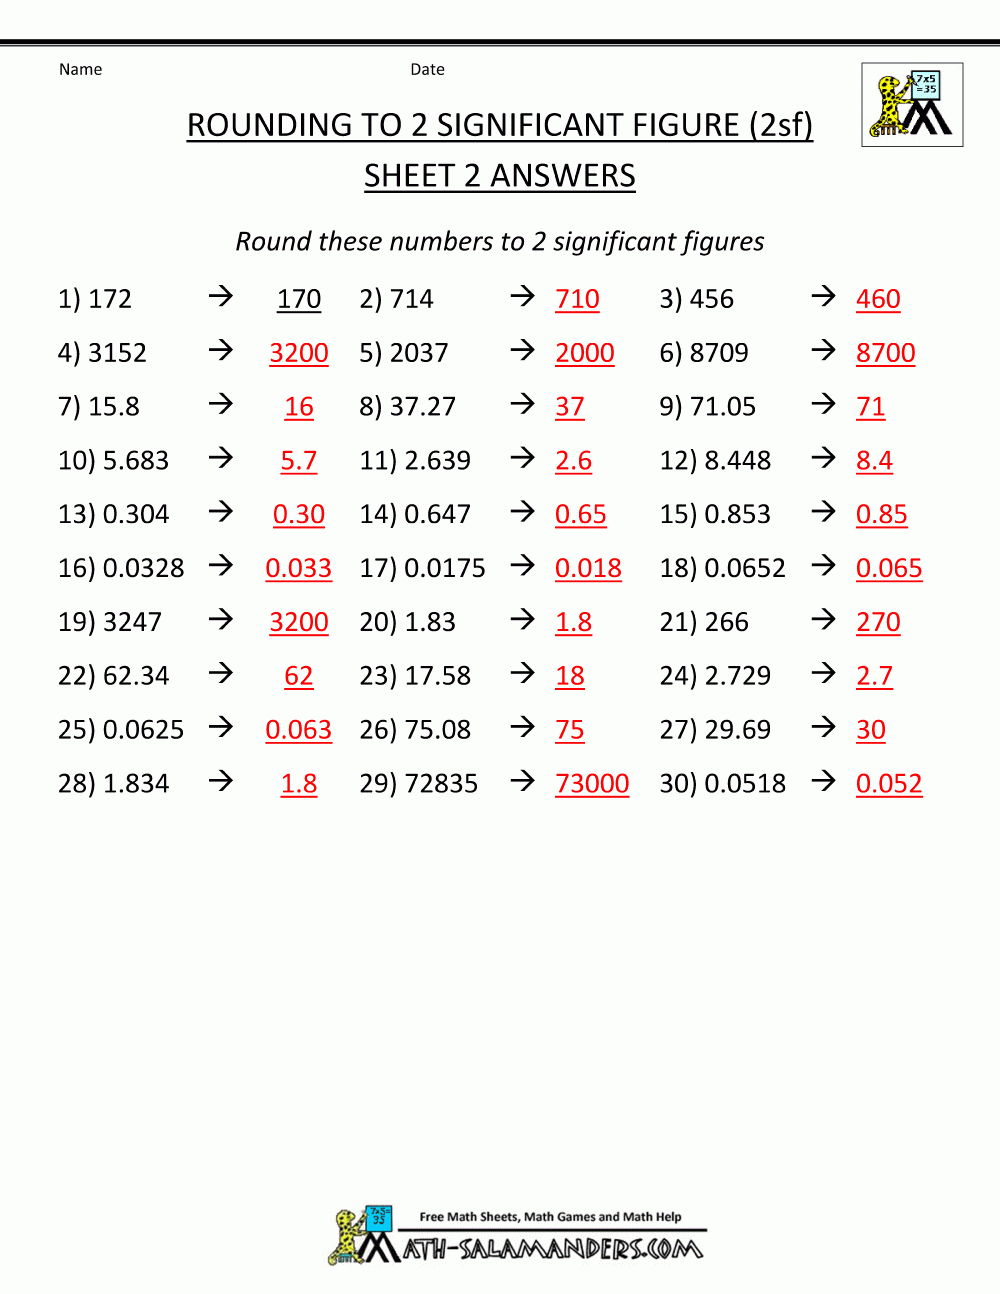 Rounding Significant Figures Worksheets Along With Significant Figures Worksheet Answers